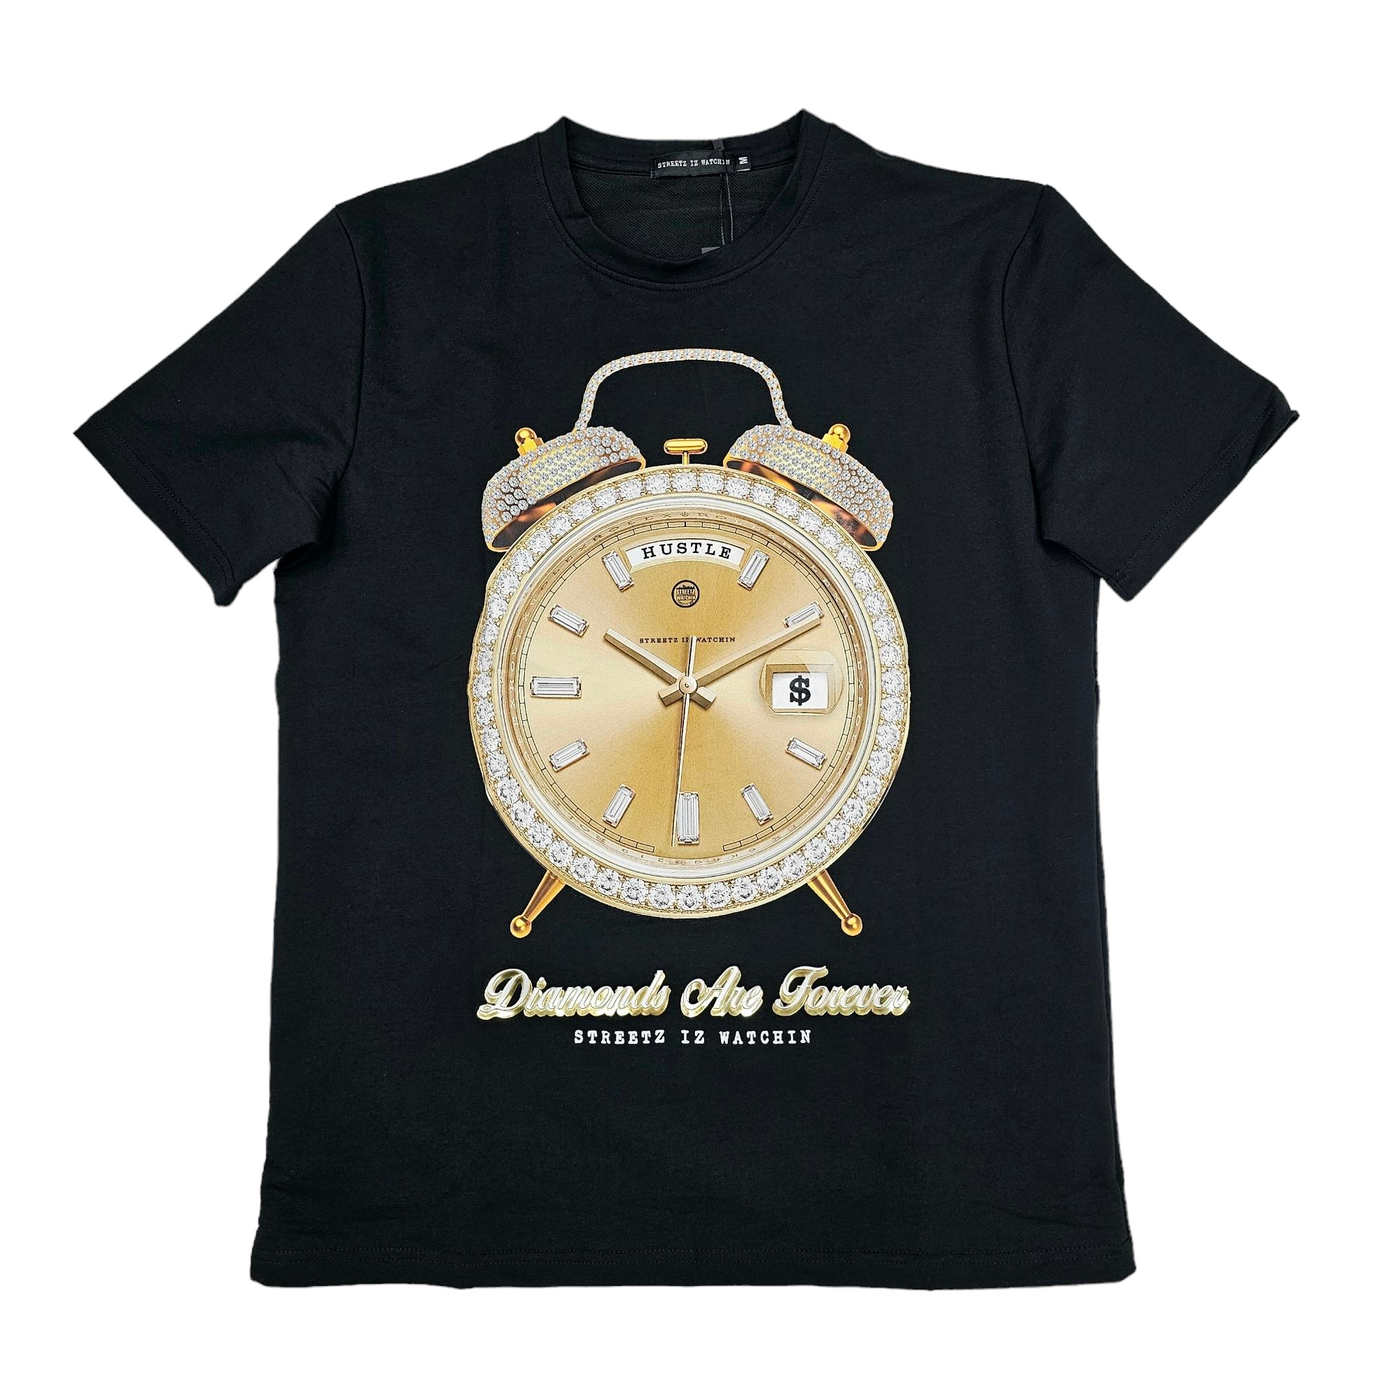 SIW Diamonds Are forever T-Shirt Black